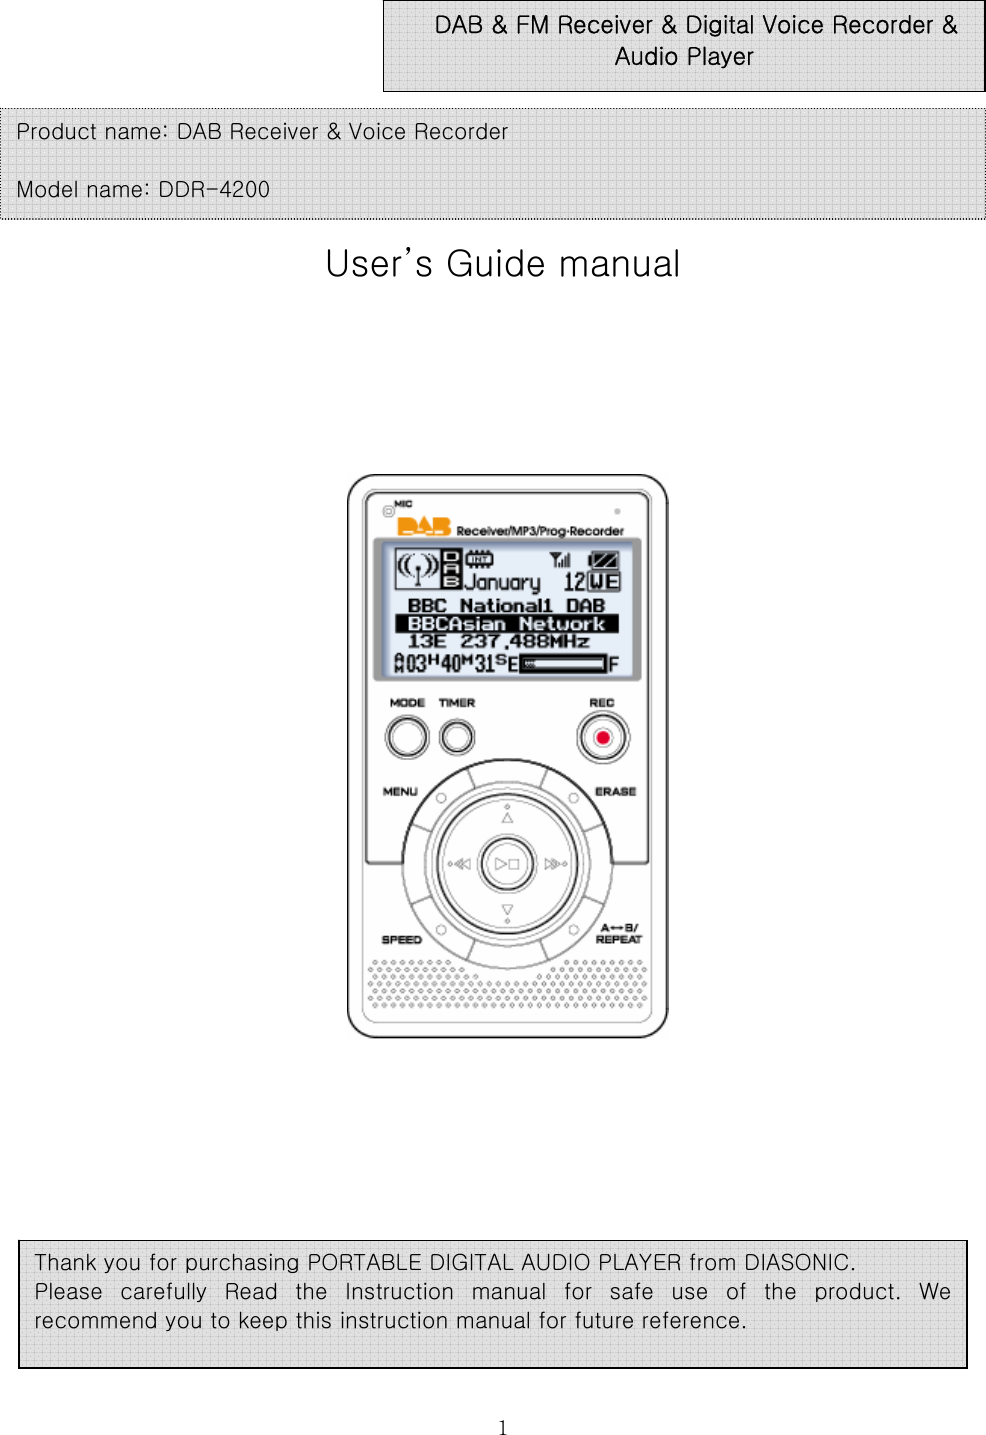  1     User’s Guide manual                             DAB &amp; FM Receiver &amp; Digital Voice Recorder &amp; Audio Player Product name: DAB Receiver &amp; Voice Recorder  Model name: DDR-4200 Thank you for purchasing PORTABLE DIGITAL AUDIO PLAYER from DIASONIC.   Please carefully Read the Instruction manual for safe use of the  product.  We recommend you to keep this instruction manual for future reference.  